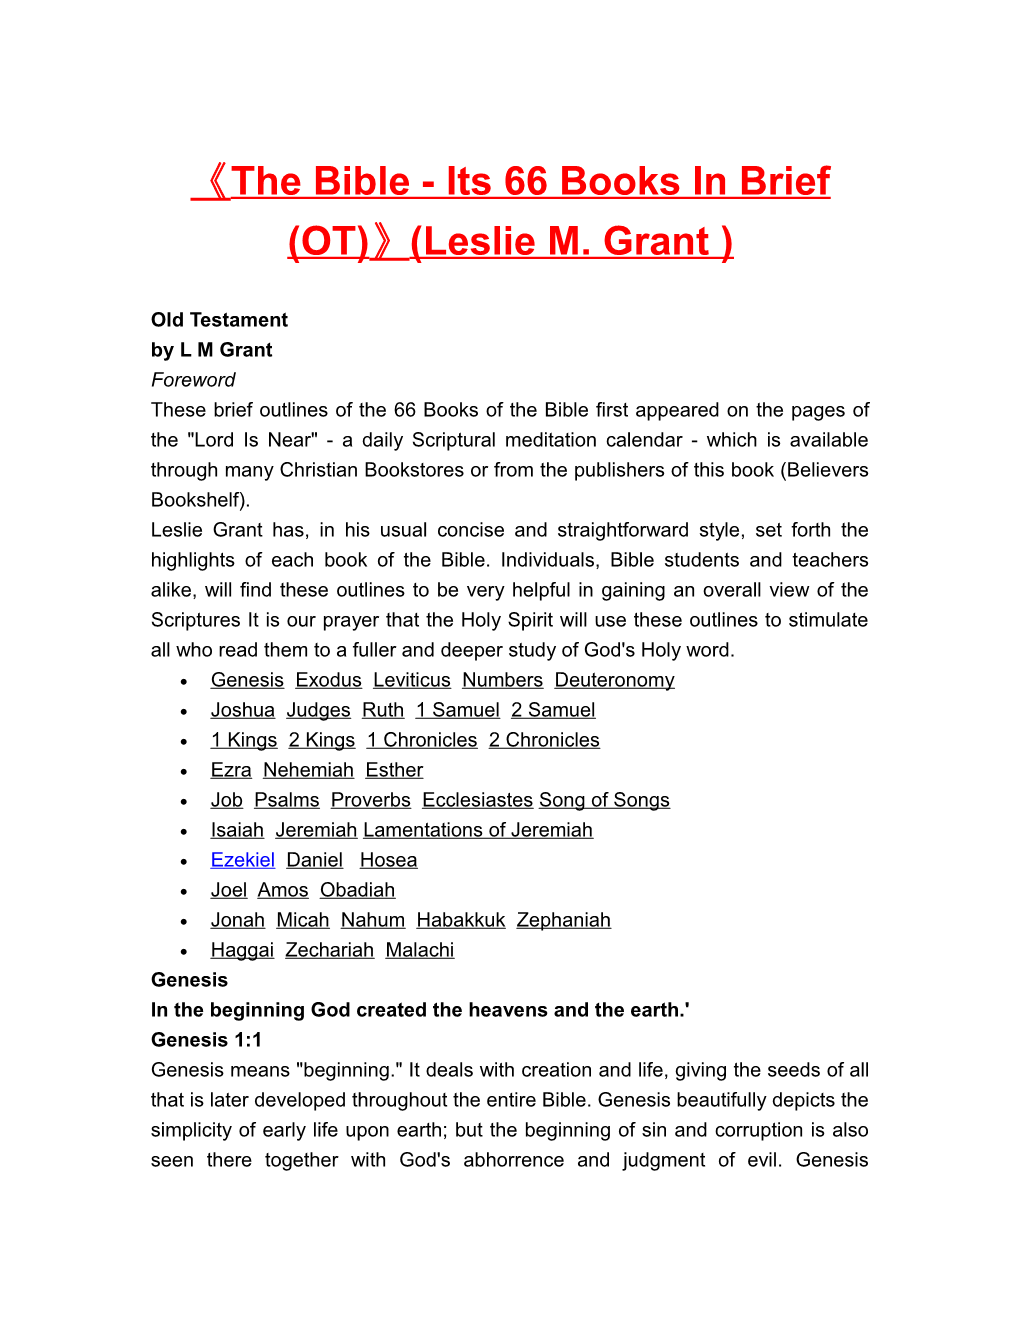 The Bible - Its 66 Books in Brief (OT) (Leslie M. Grant )